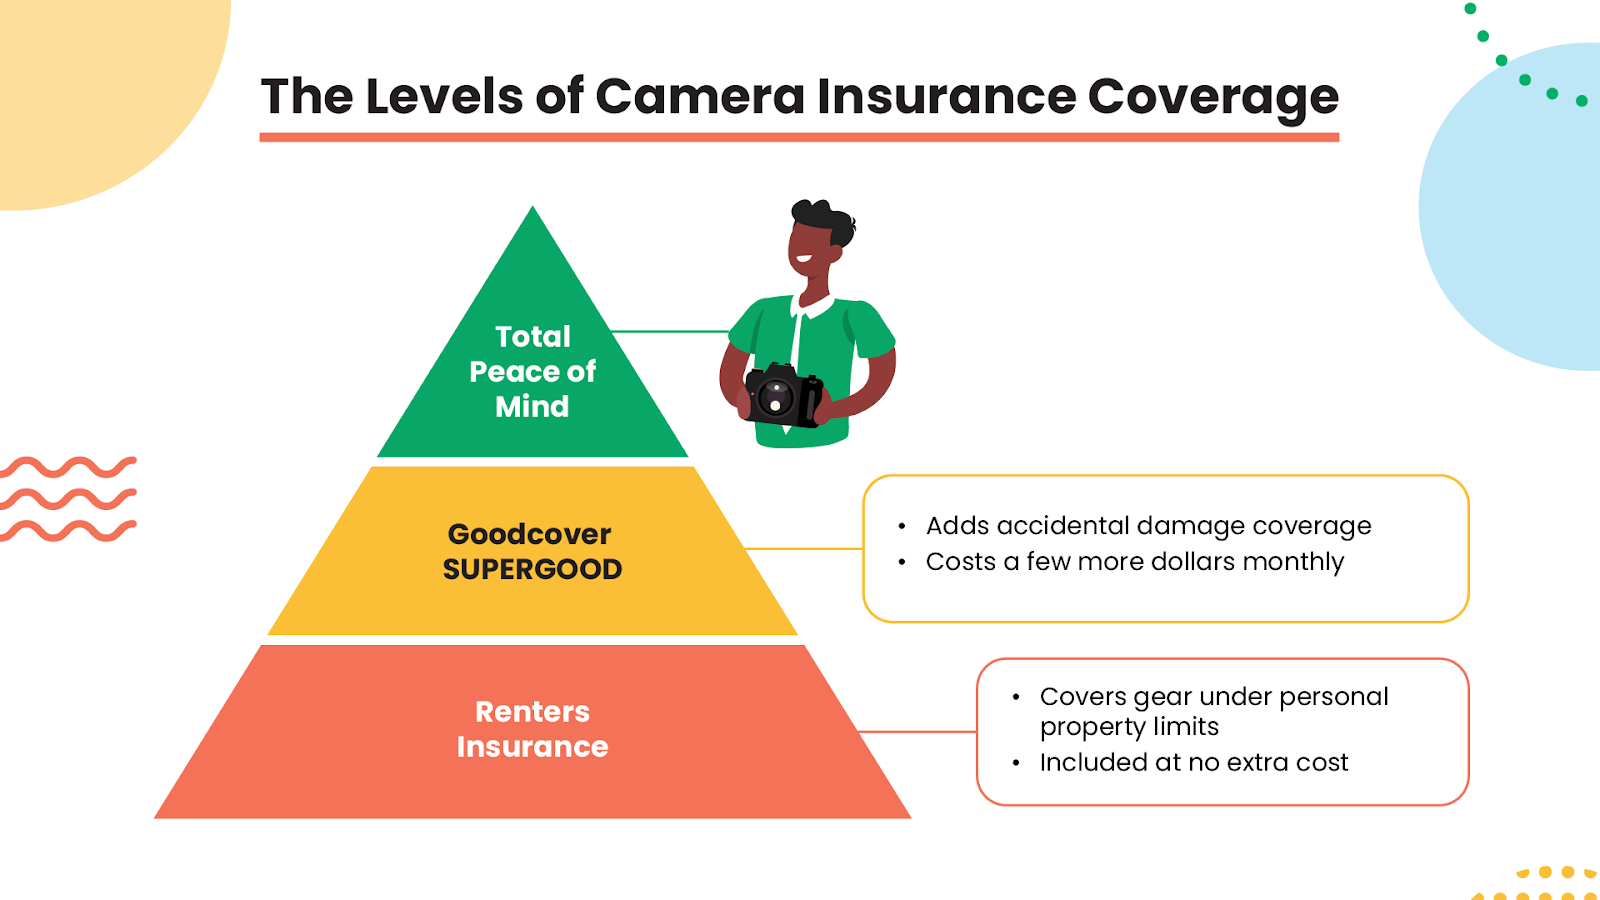 The levels of camera insurance coverage. 